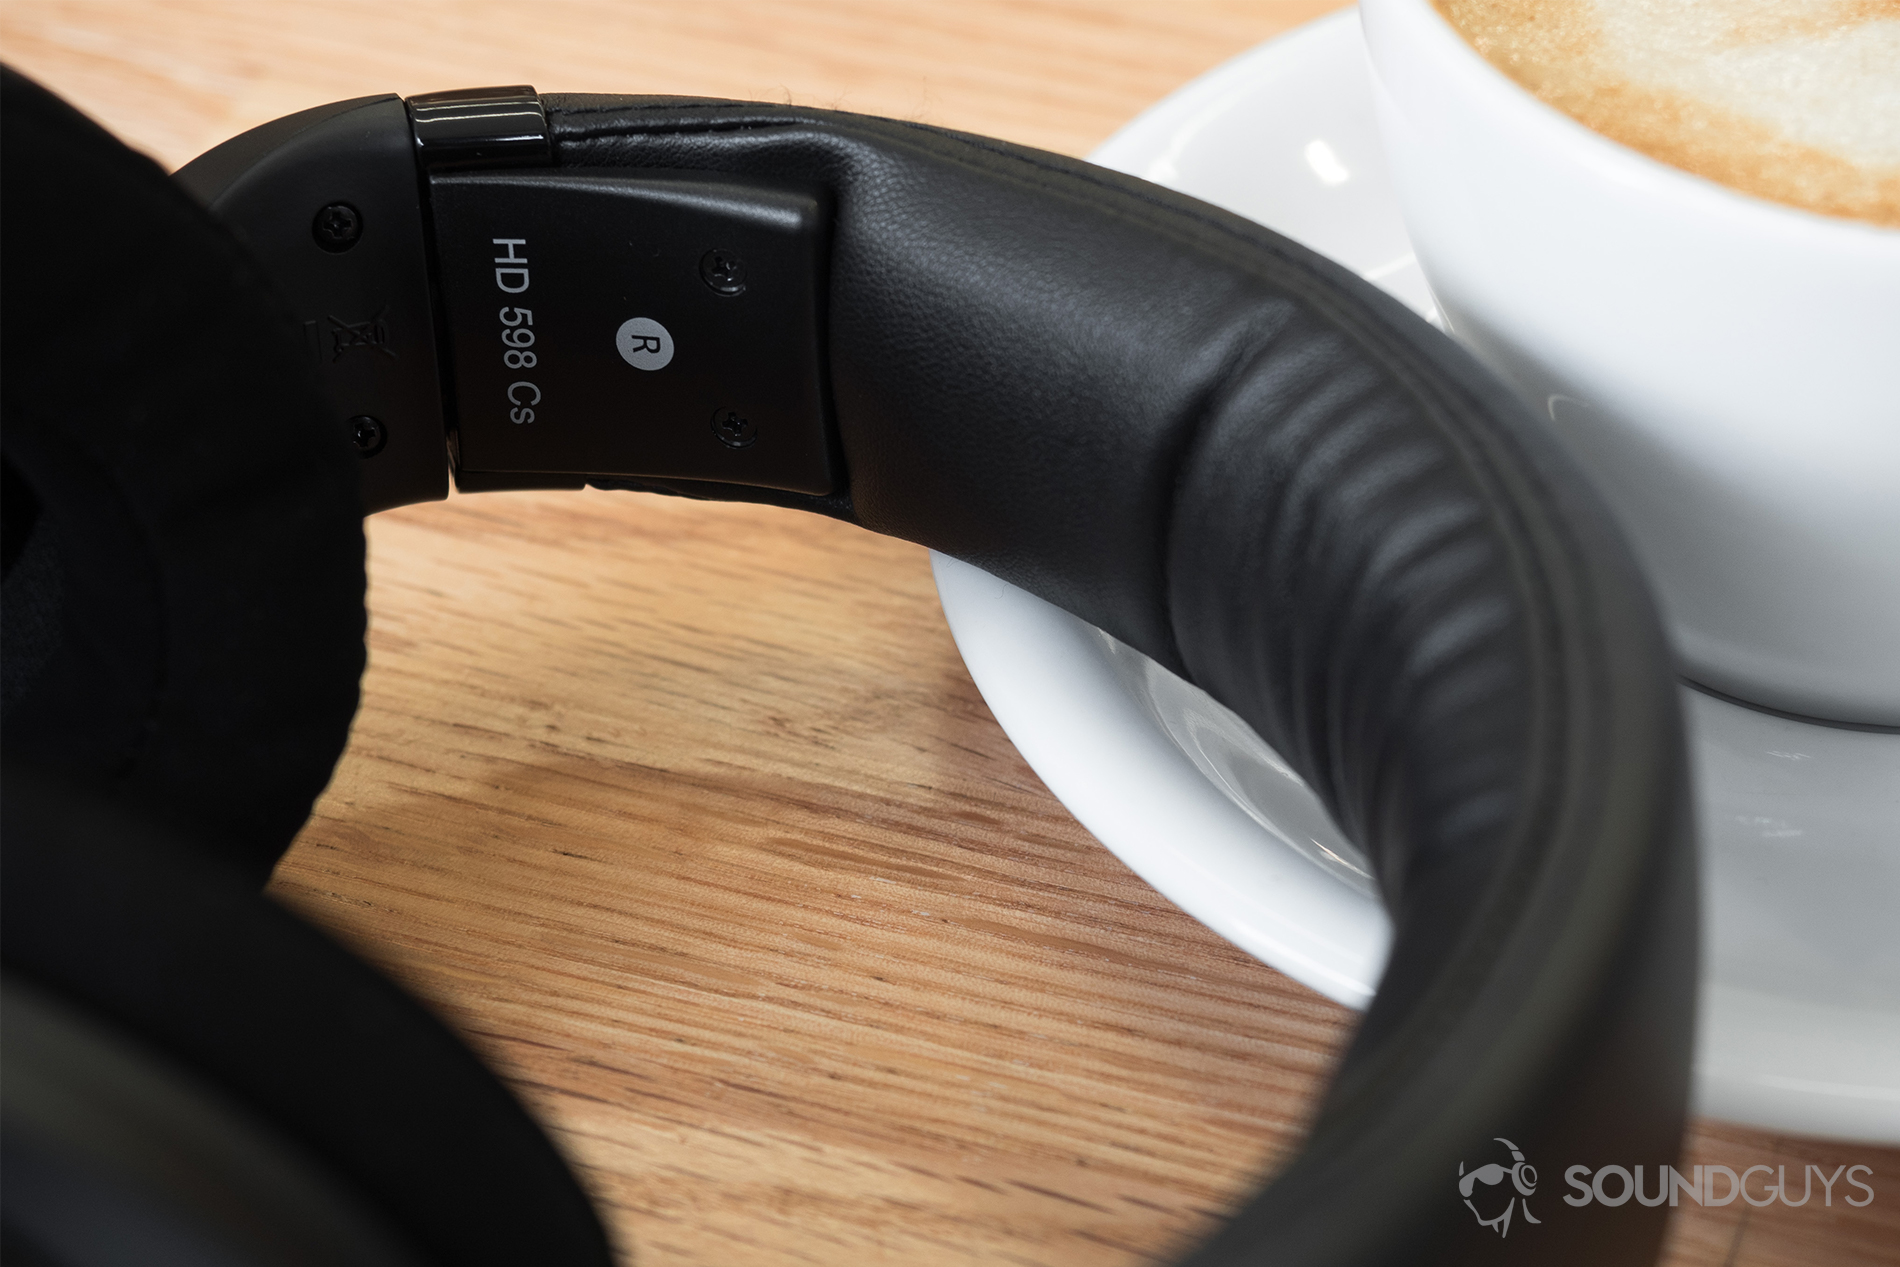 Sennheiser HD 598 CS review: A close-up of the interior of the headband on a coffee cup saucer.